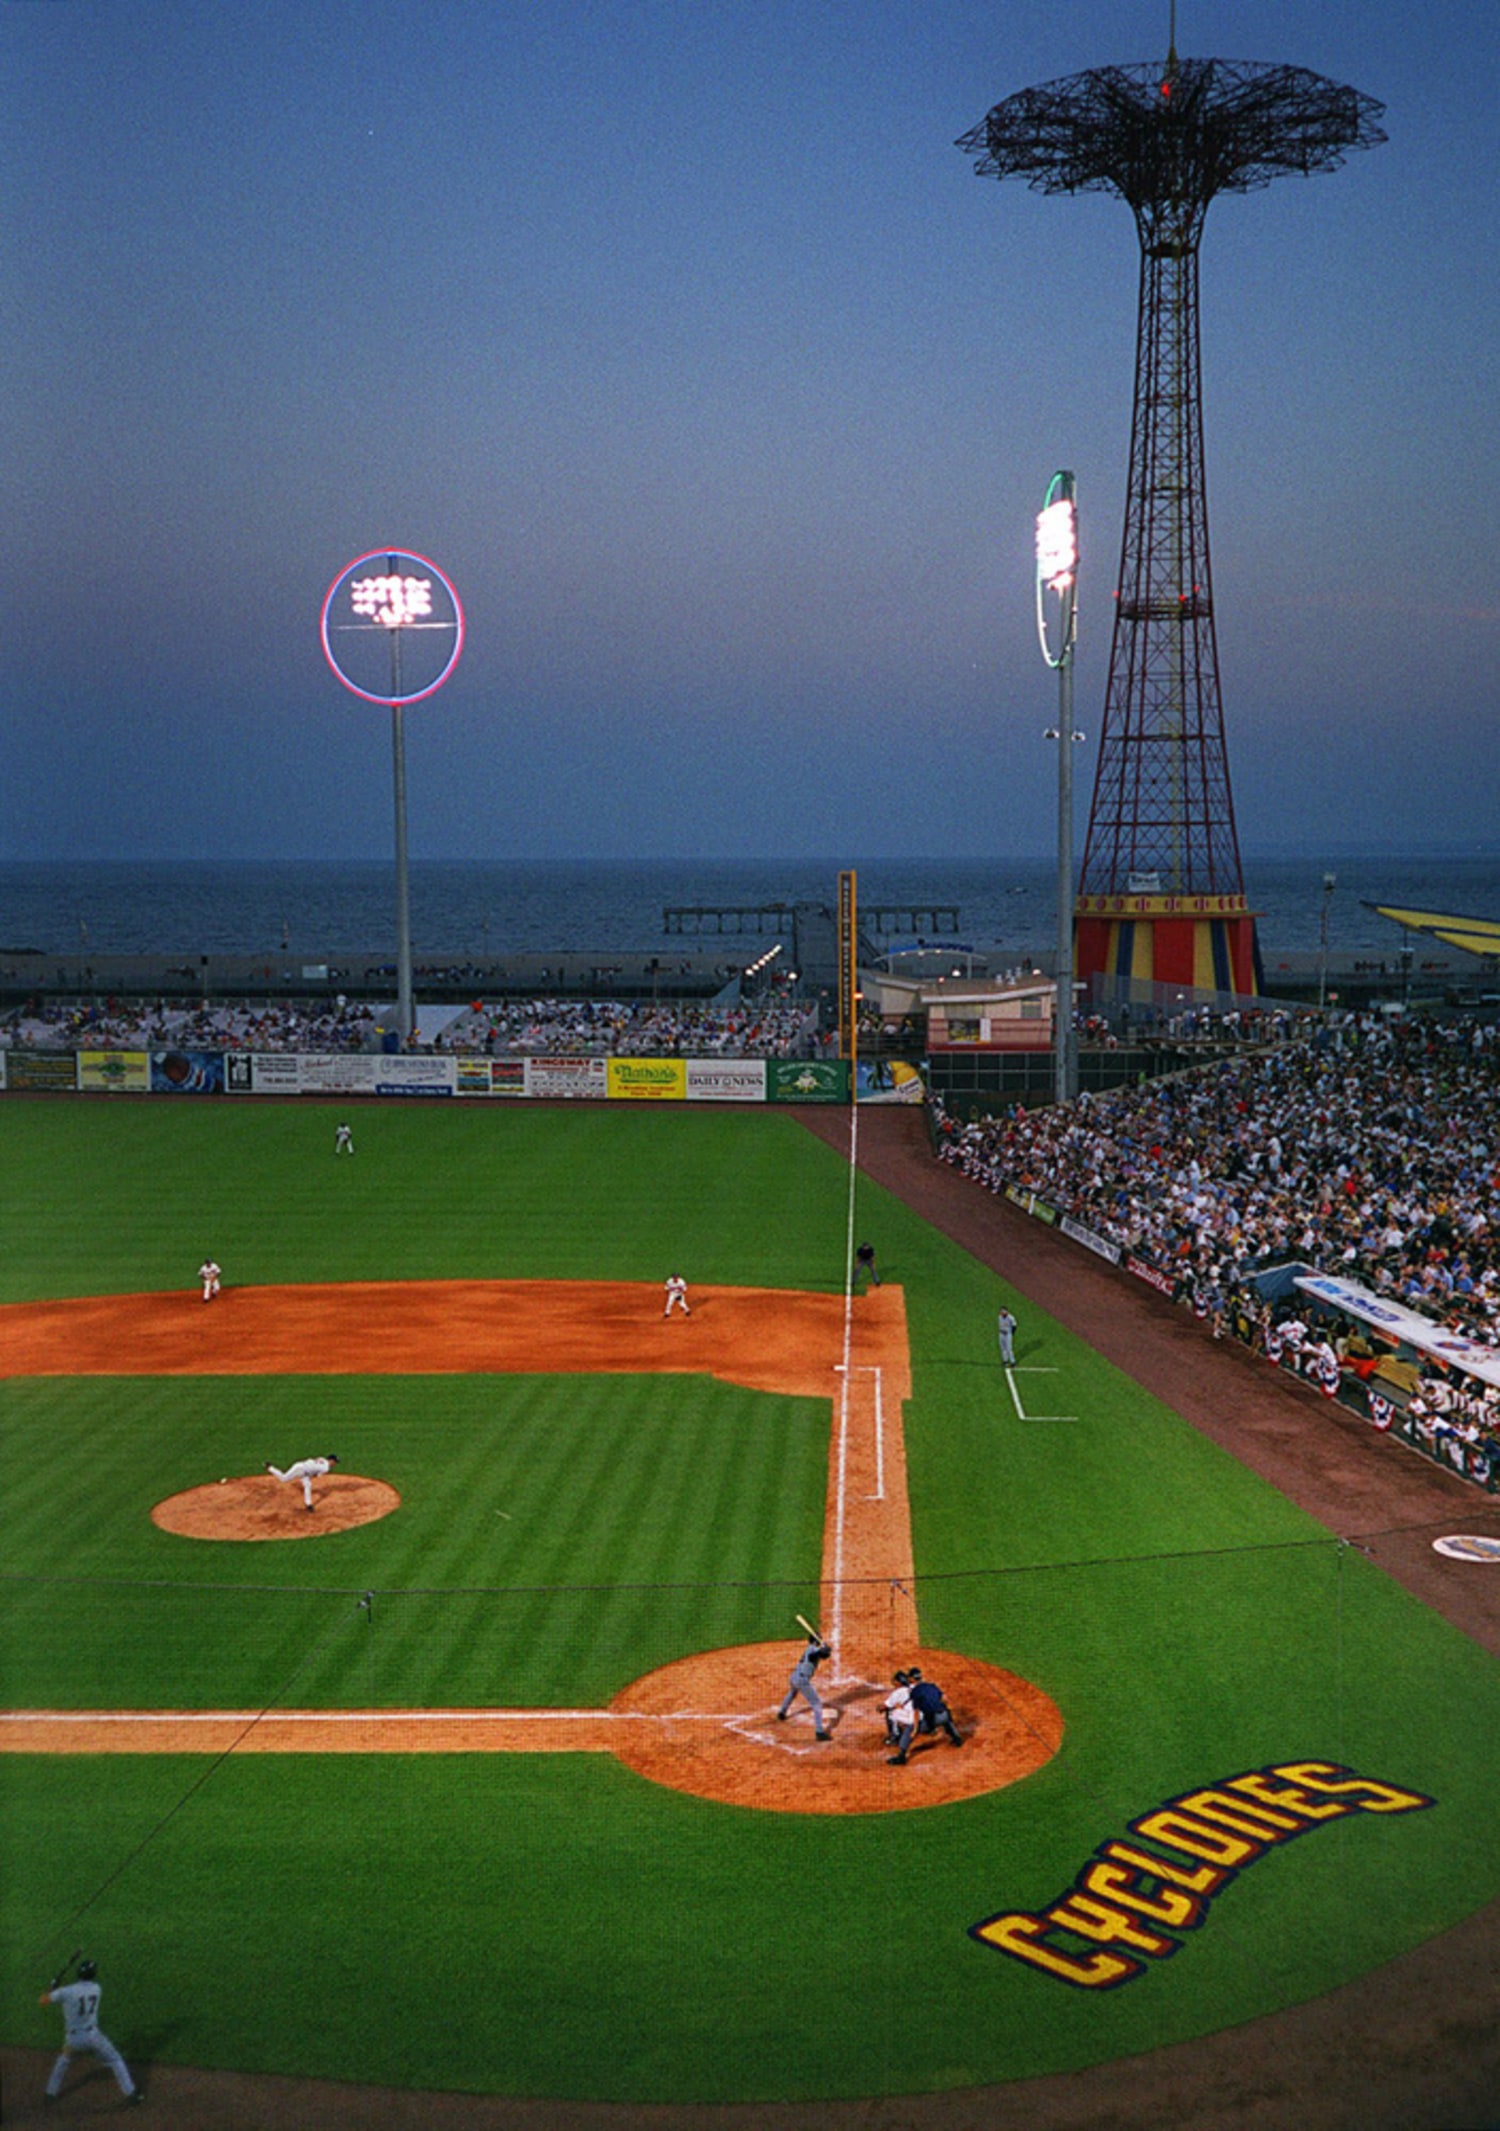 Take me out to the minor-league ballpark